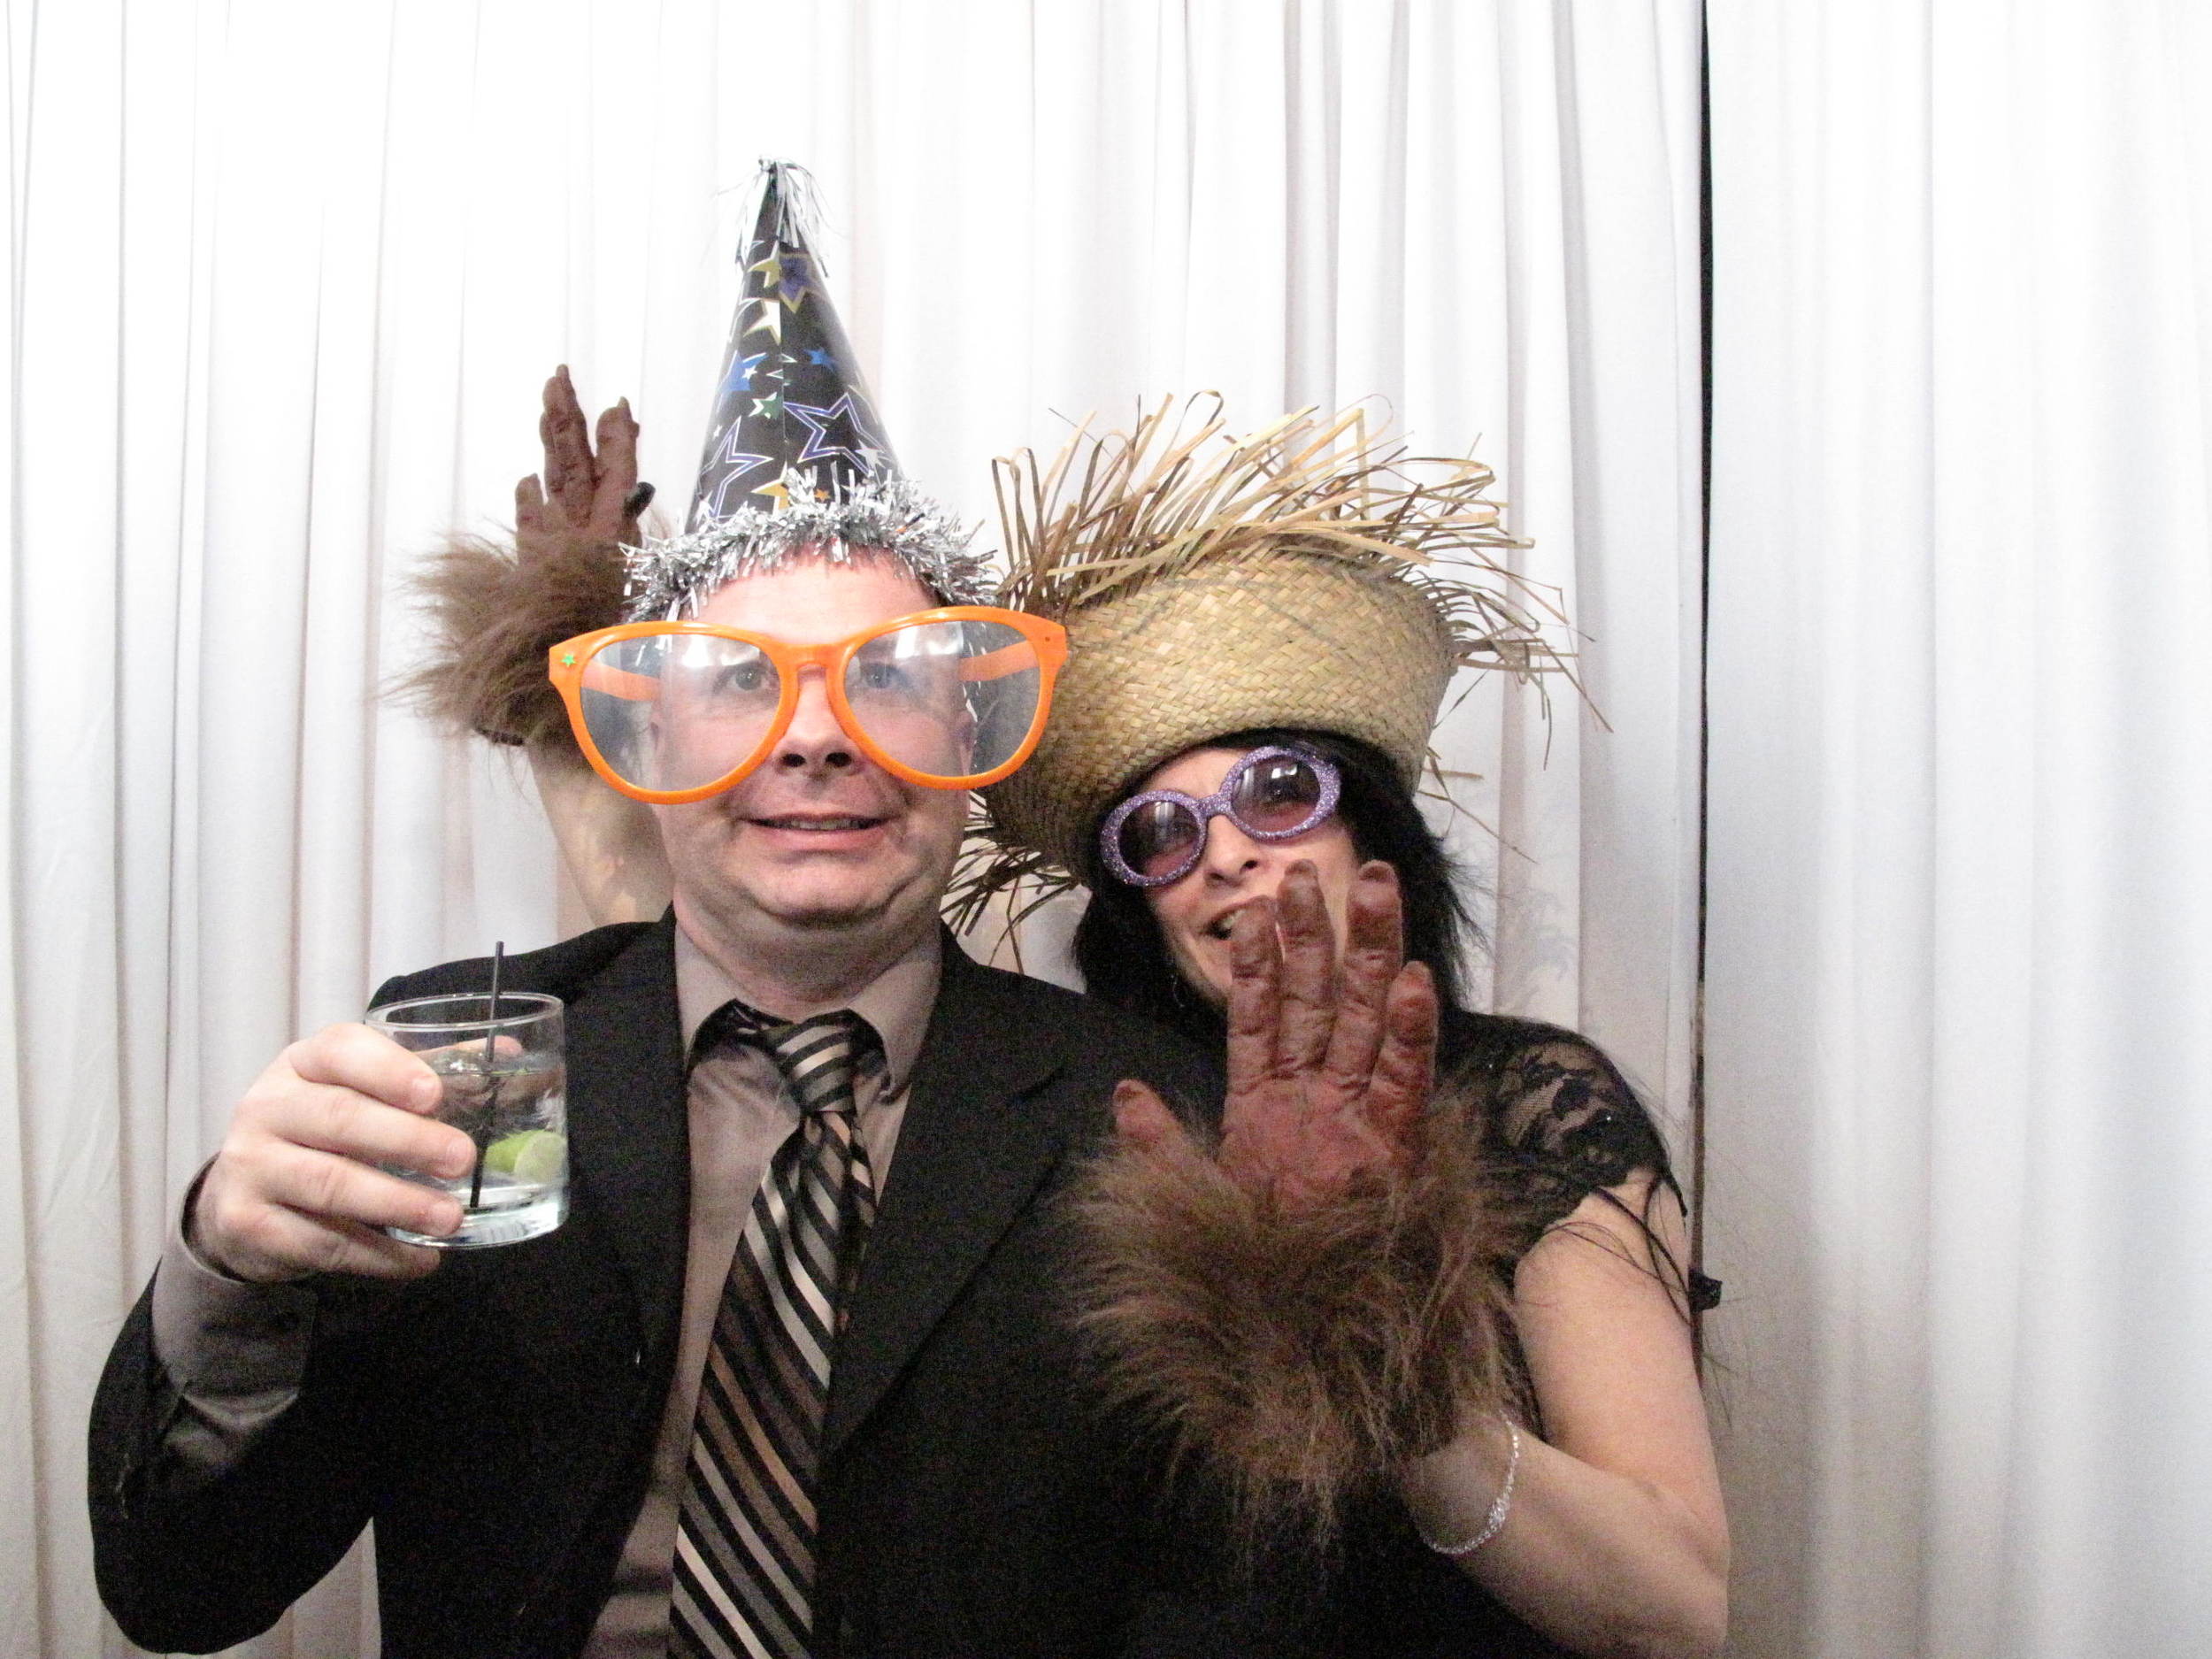 Snapshot Photobooths at Oyster Point in Red Bank, New Jersey